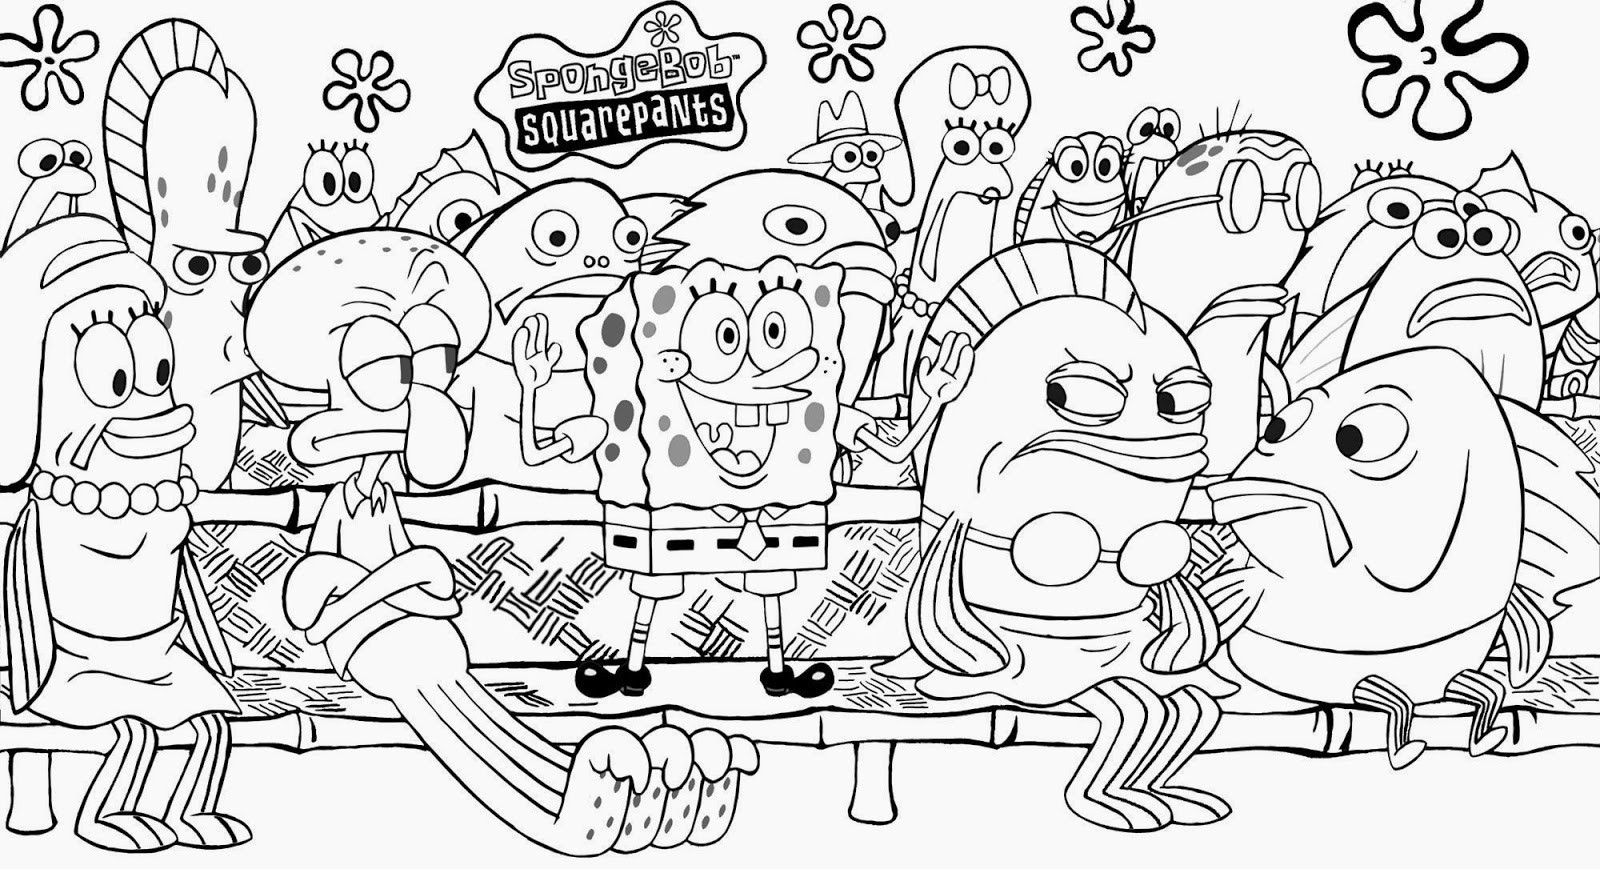 free-spongebob-coloring-pages-of-free-spongebob-coloring-pages Free Spongebob Coloring Pages Cartoon 